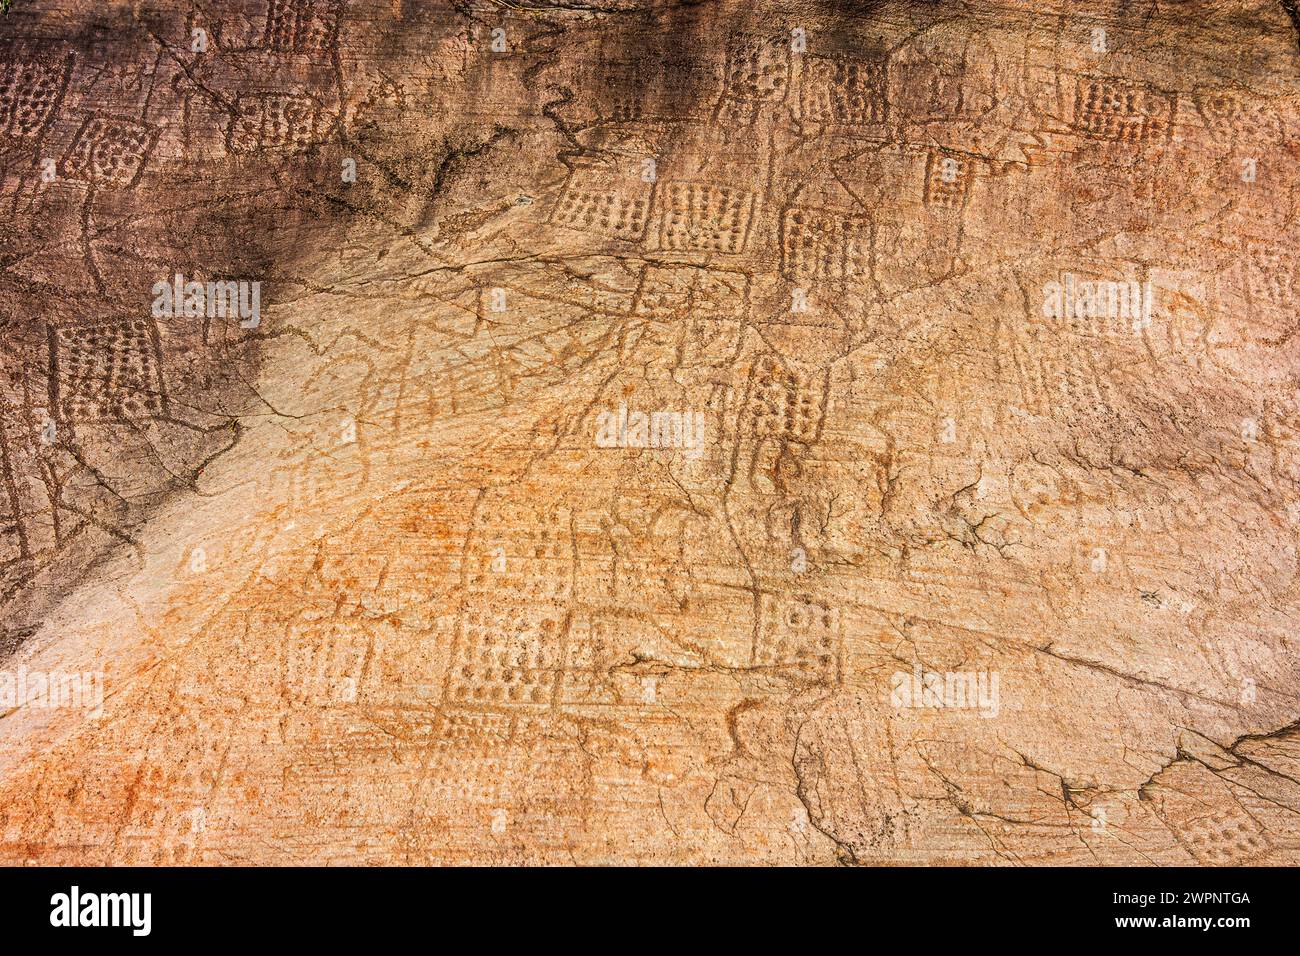 Capo di Ponte, Geometrical composition called 'Bedolina map'. R.1, Municipal Archaeological Park of Seradina-Bedolina, rock art sites, rock drawings in Valcamonica (Camonica Valley), petroglyphs in Brescia, Lombardia / Lombardy, Italy Stock Photo